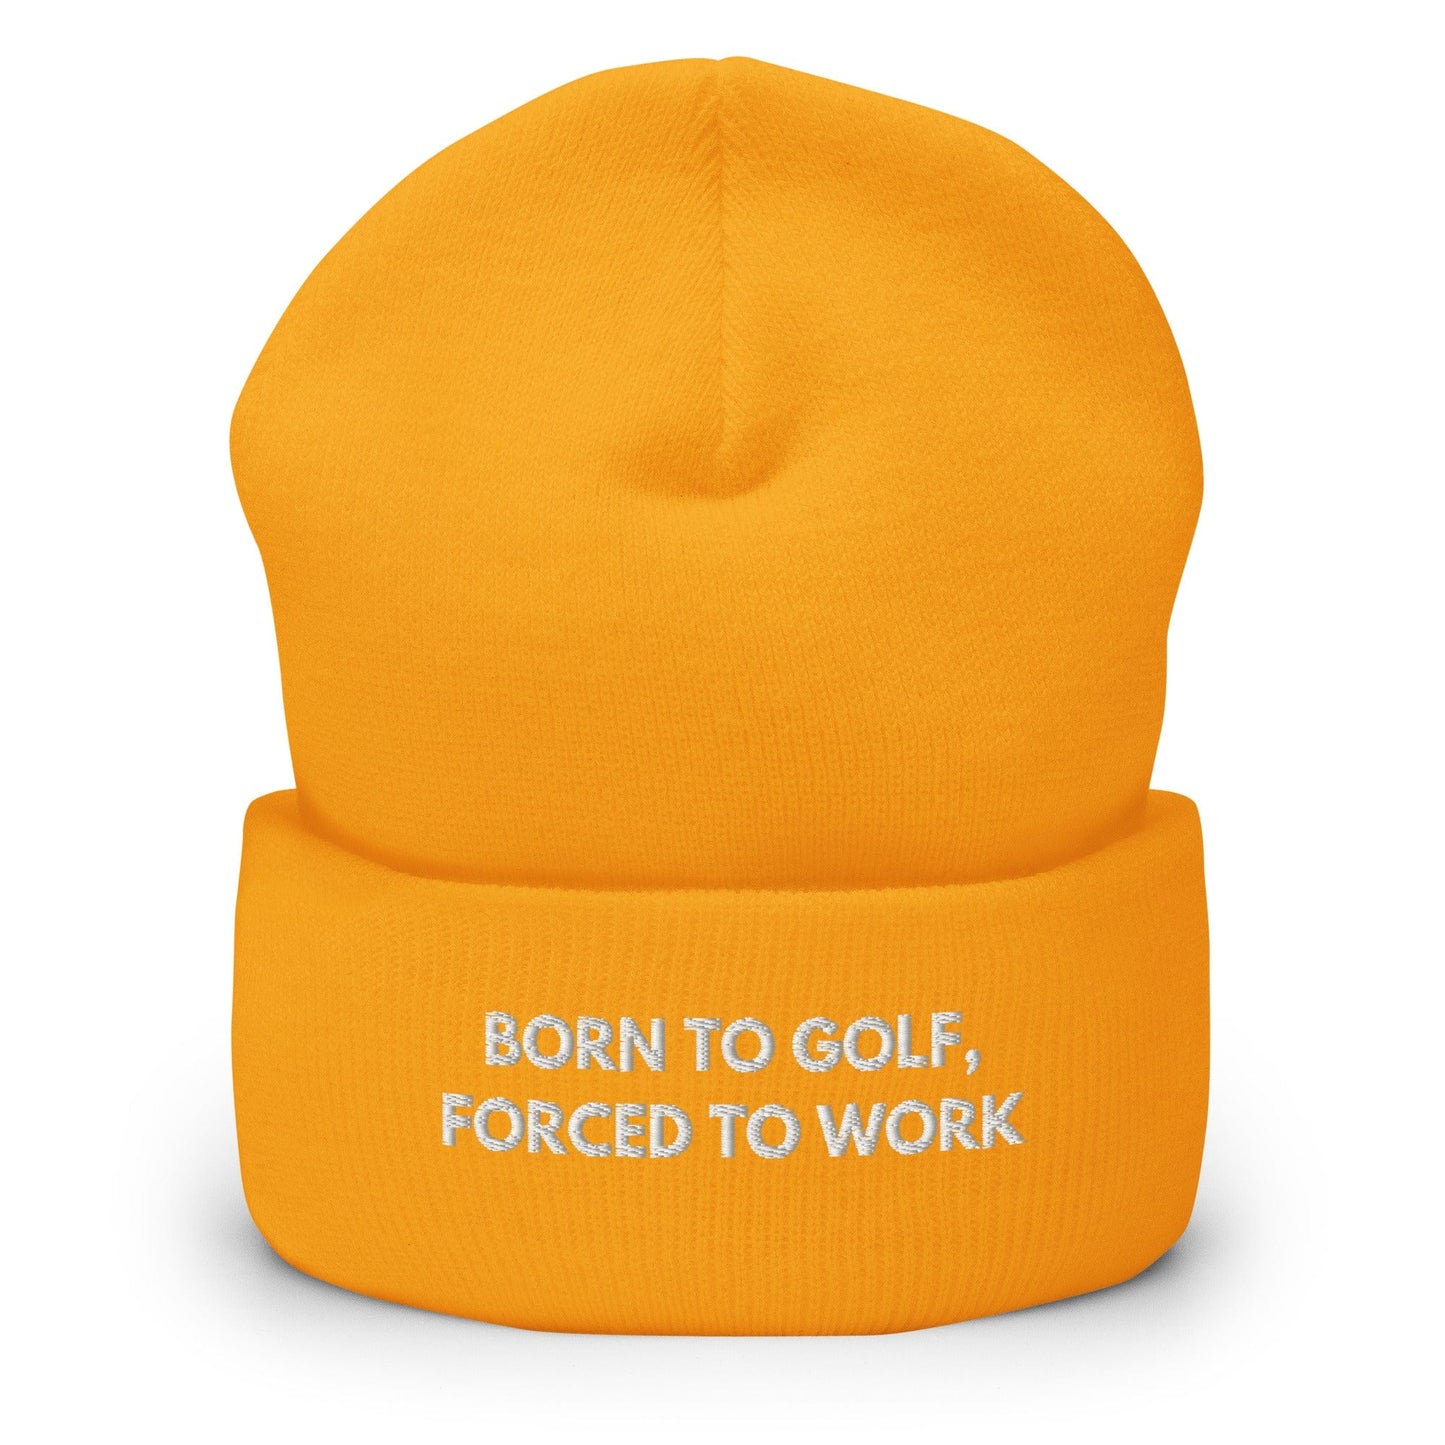 Funny Golfer Gifts  Beanie Gold Born to Golf, Forced To Work Hat Beanie